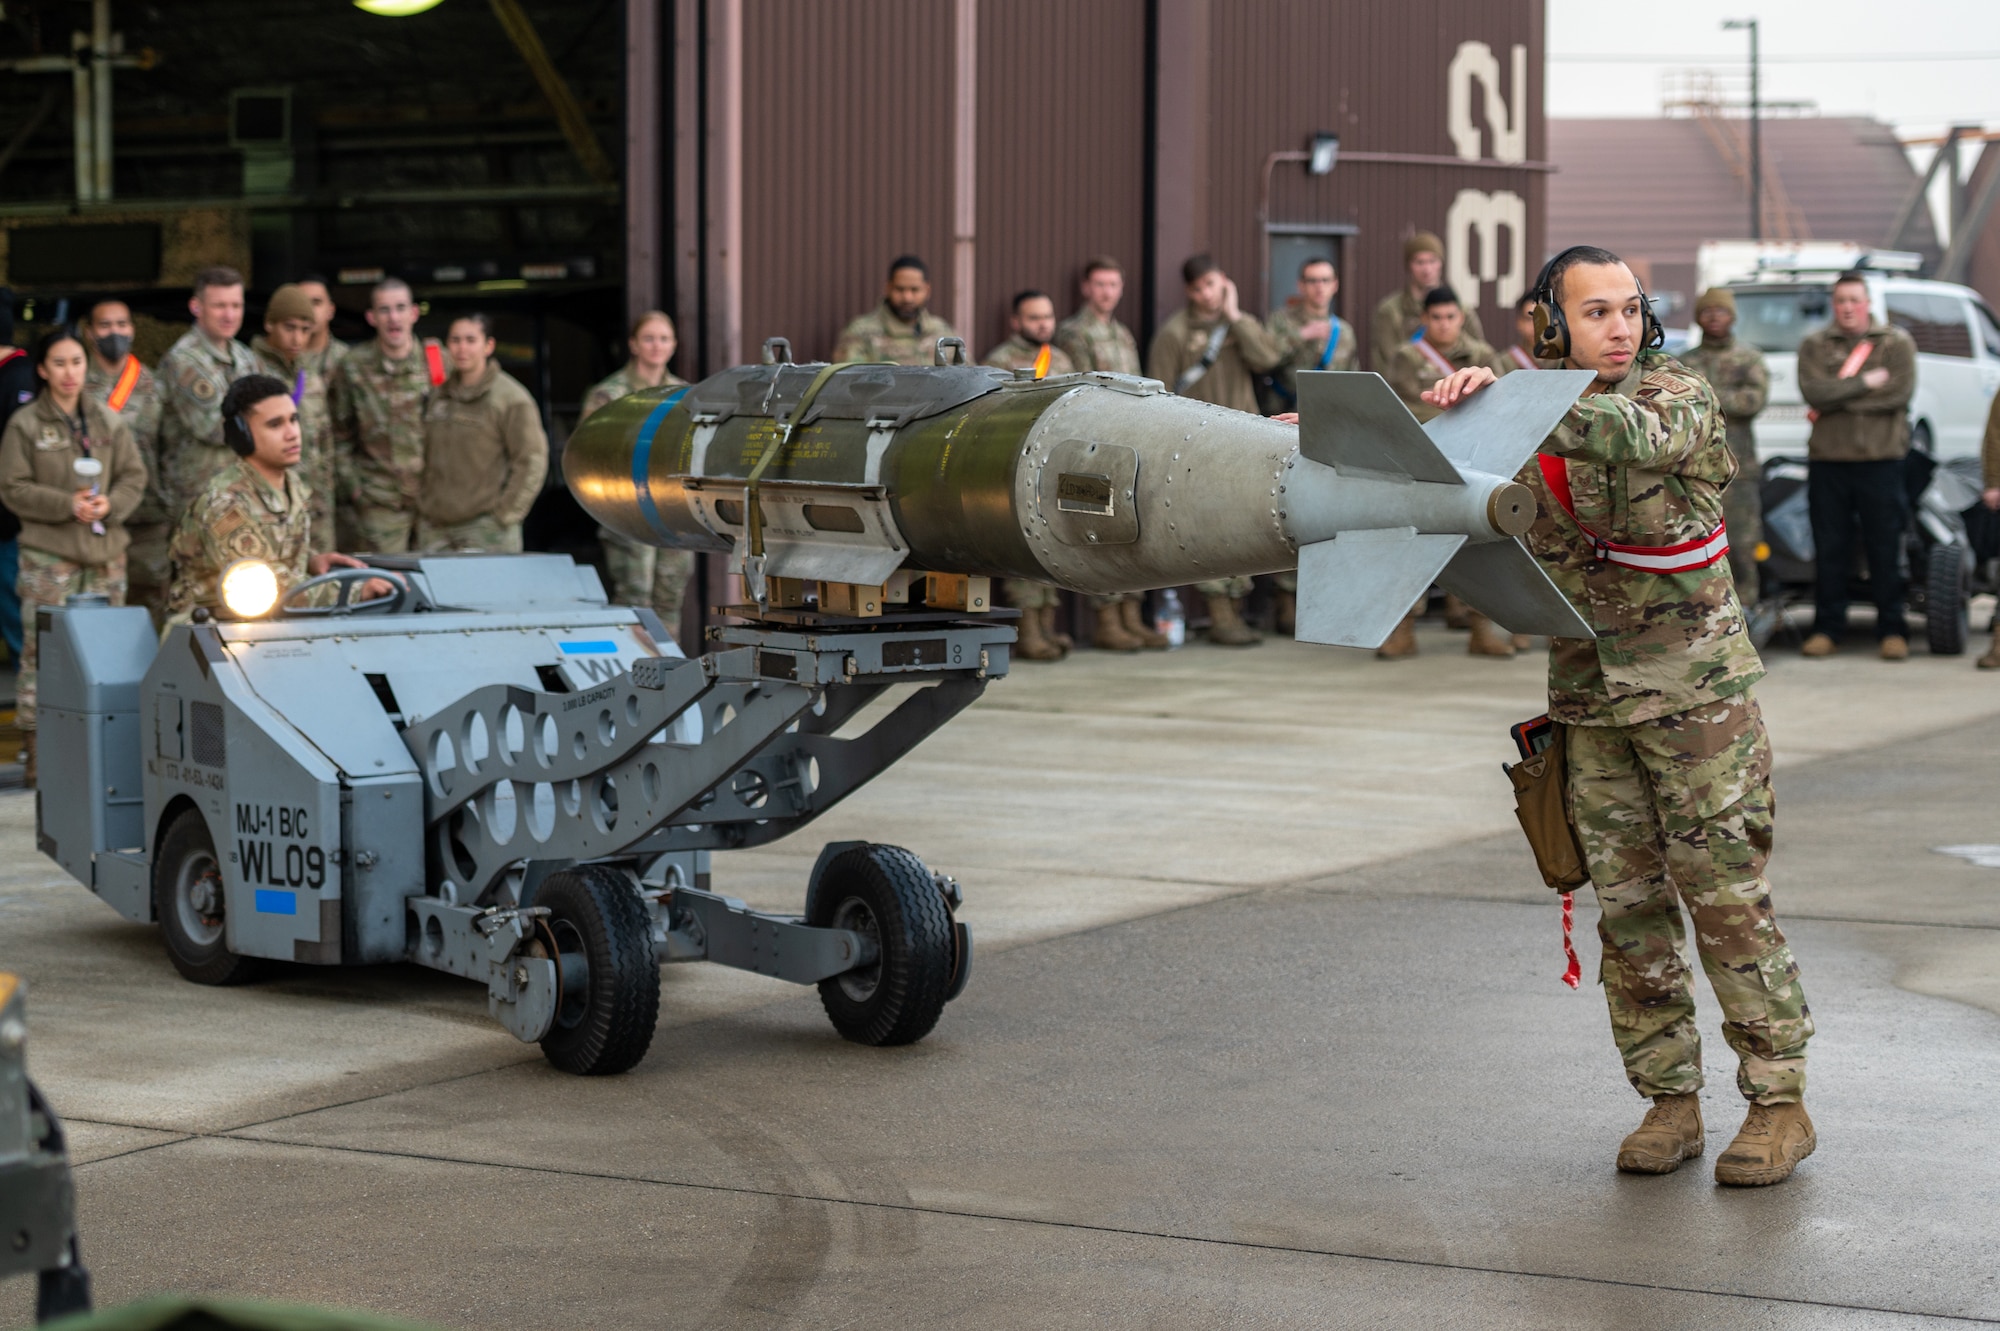 U.S. Air Force Staff Sgt. Anthony Gause, 36th Fighter Generation Squadron weapons load crew team leader, guides a MJ-1C weapons loader carrying a GBU-31V3 munition and driven by USAF Senior Airman Angel Ferrer, 36th Fighter Generation Squadron weapons load crew member, during a weapons load crew of the quarter competition